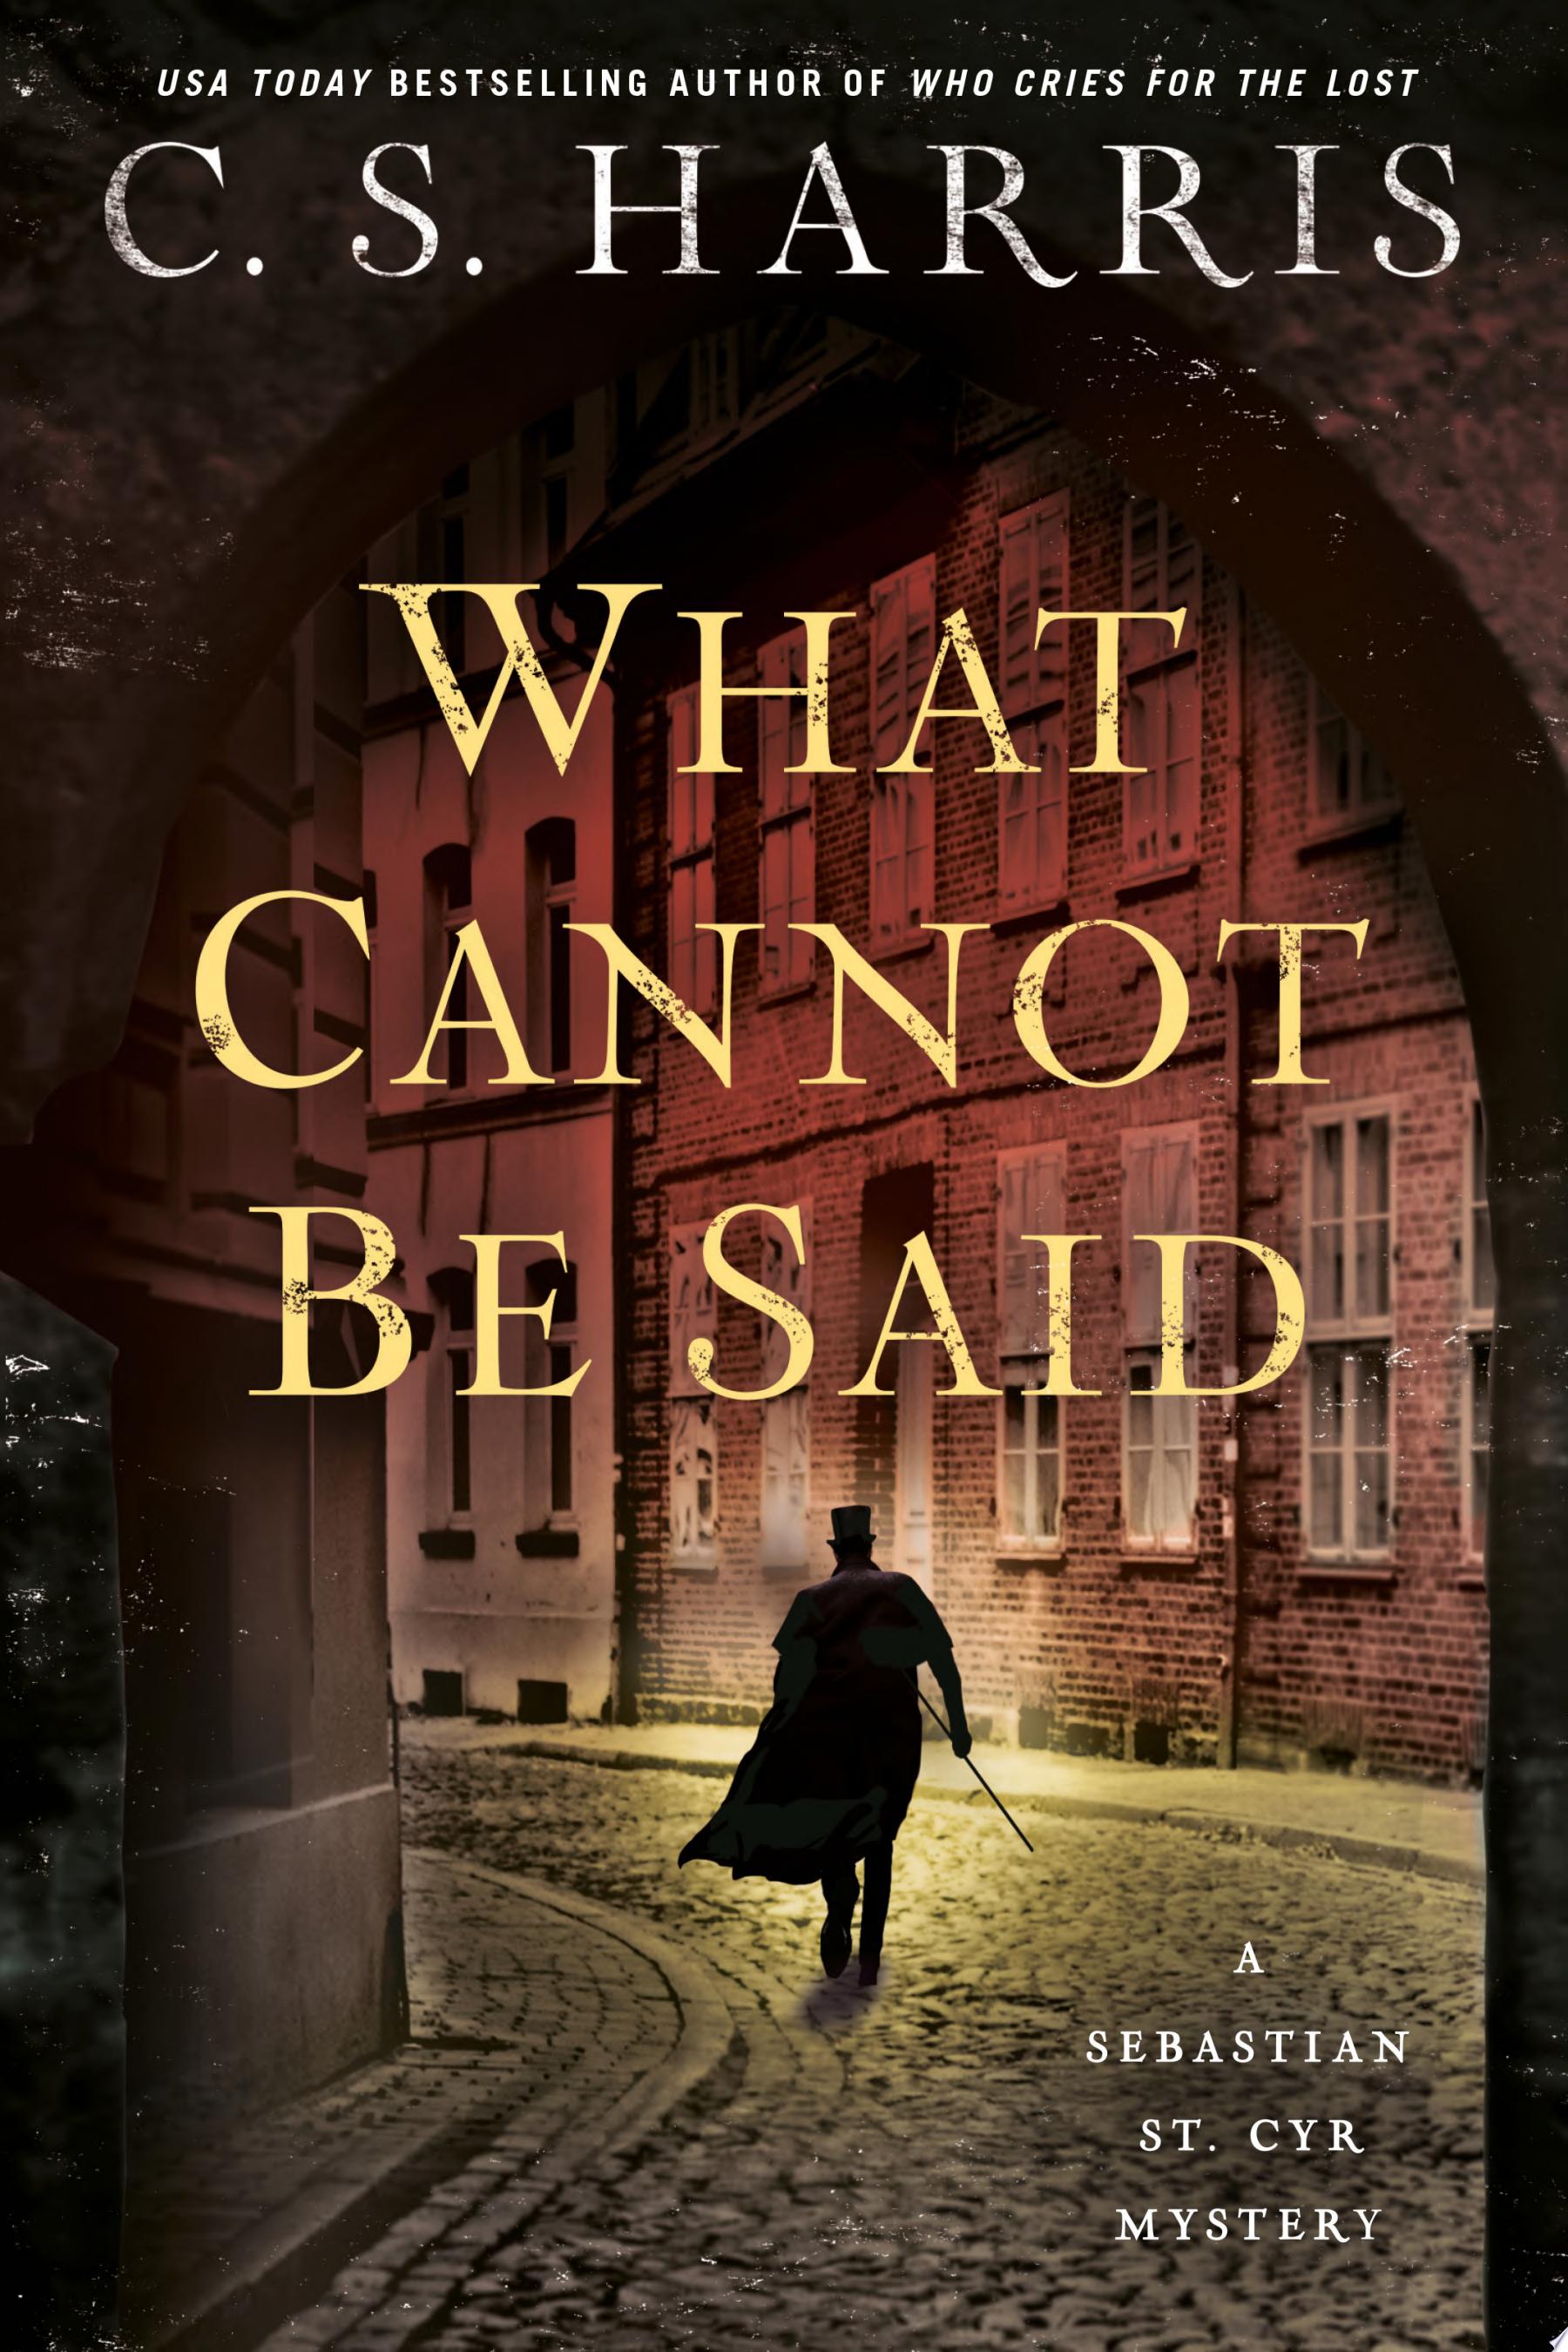 Image for "What Cannot Be Said"